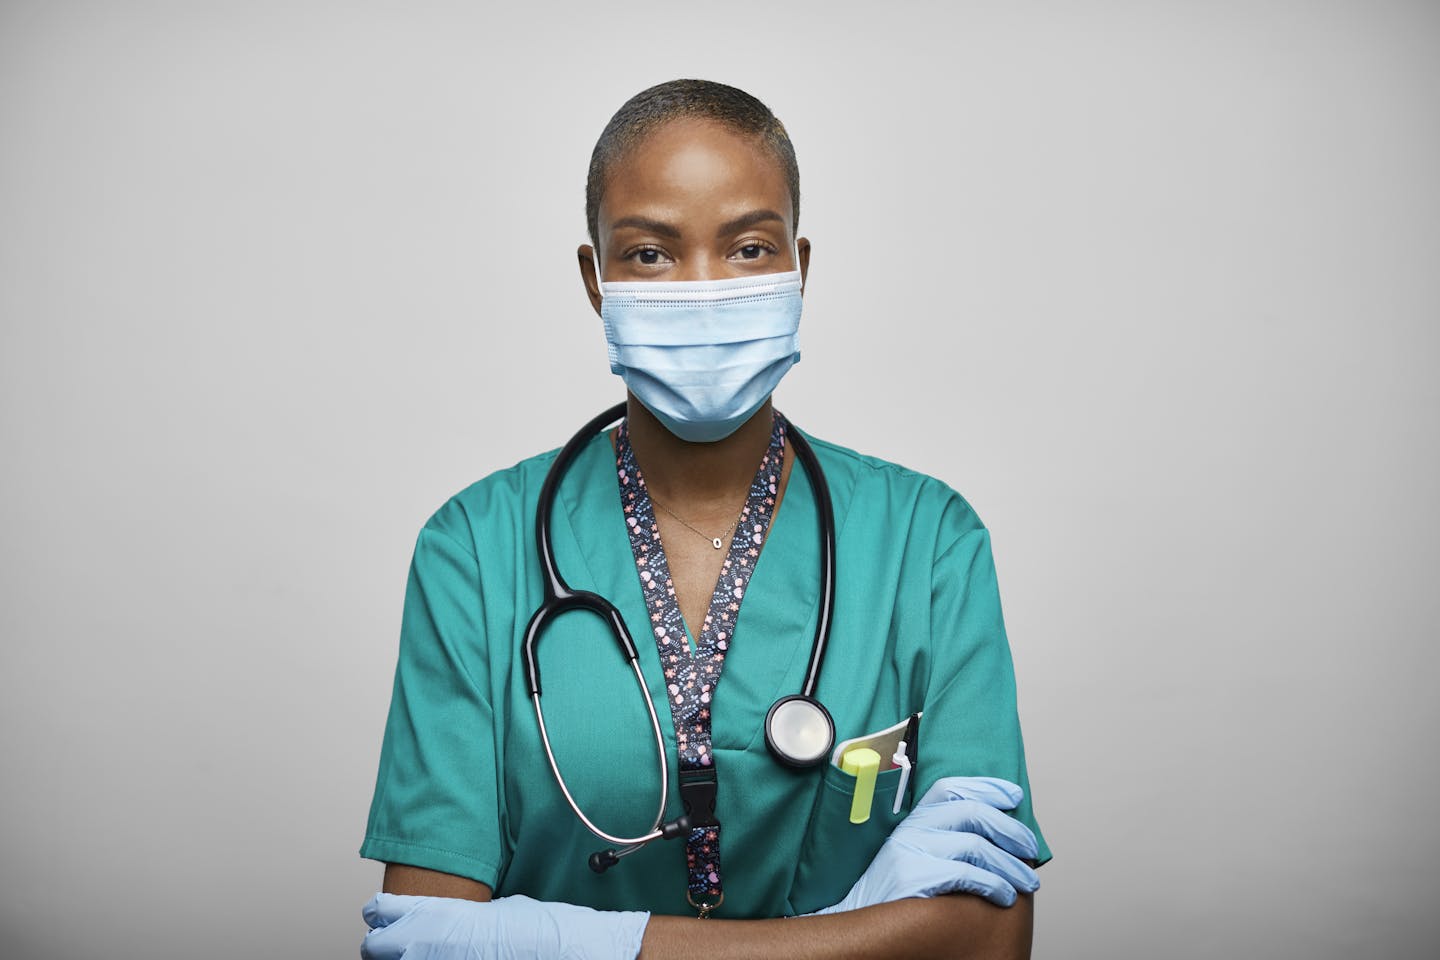 masked female health care worker looking straight at camera with arms crossed